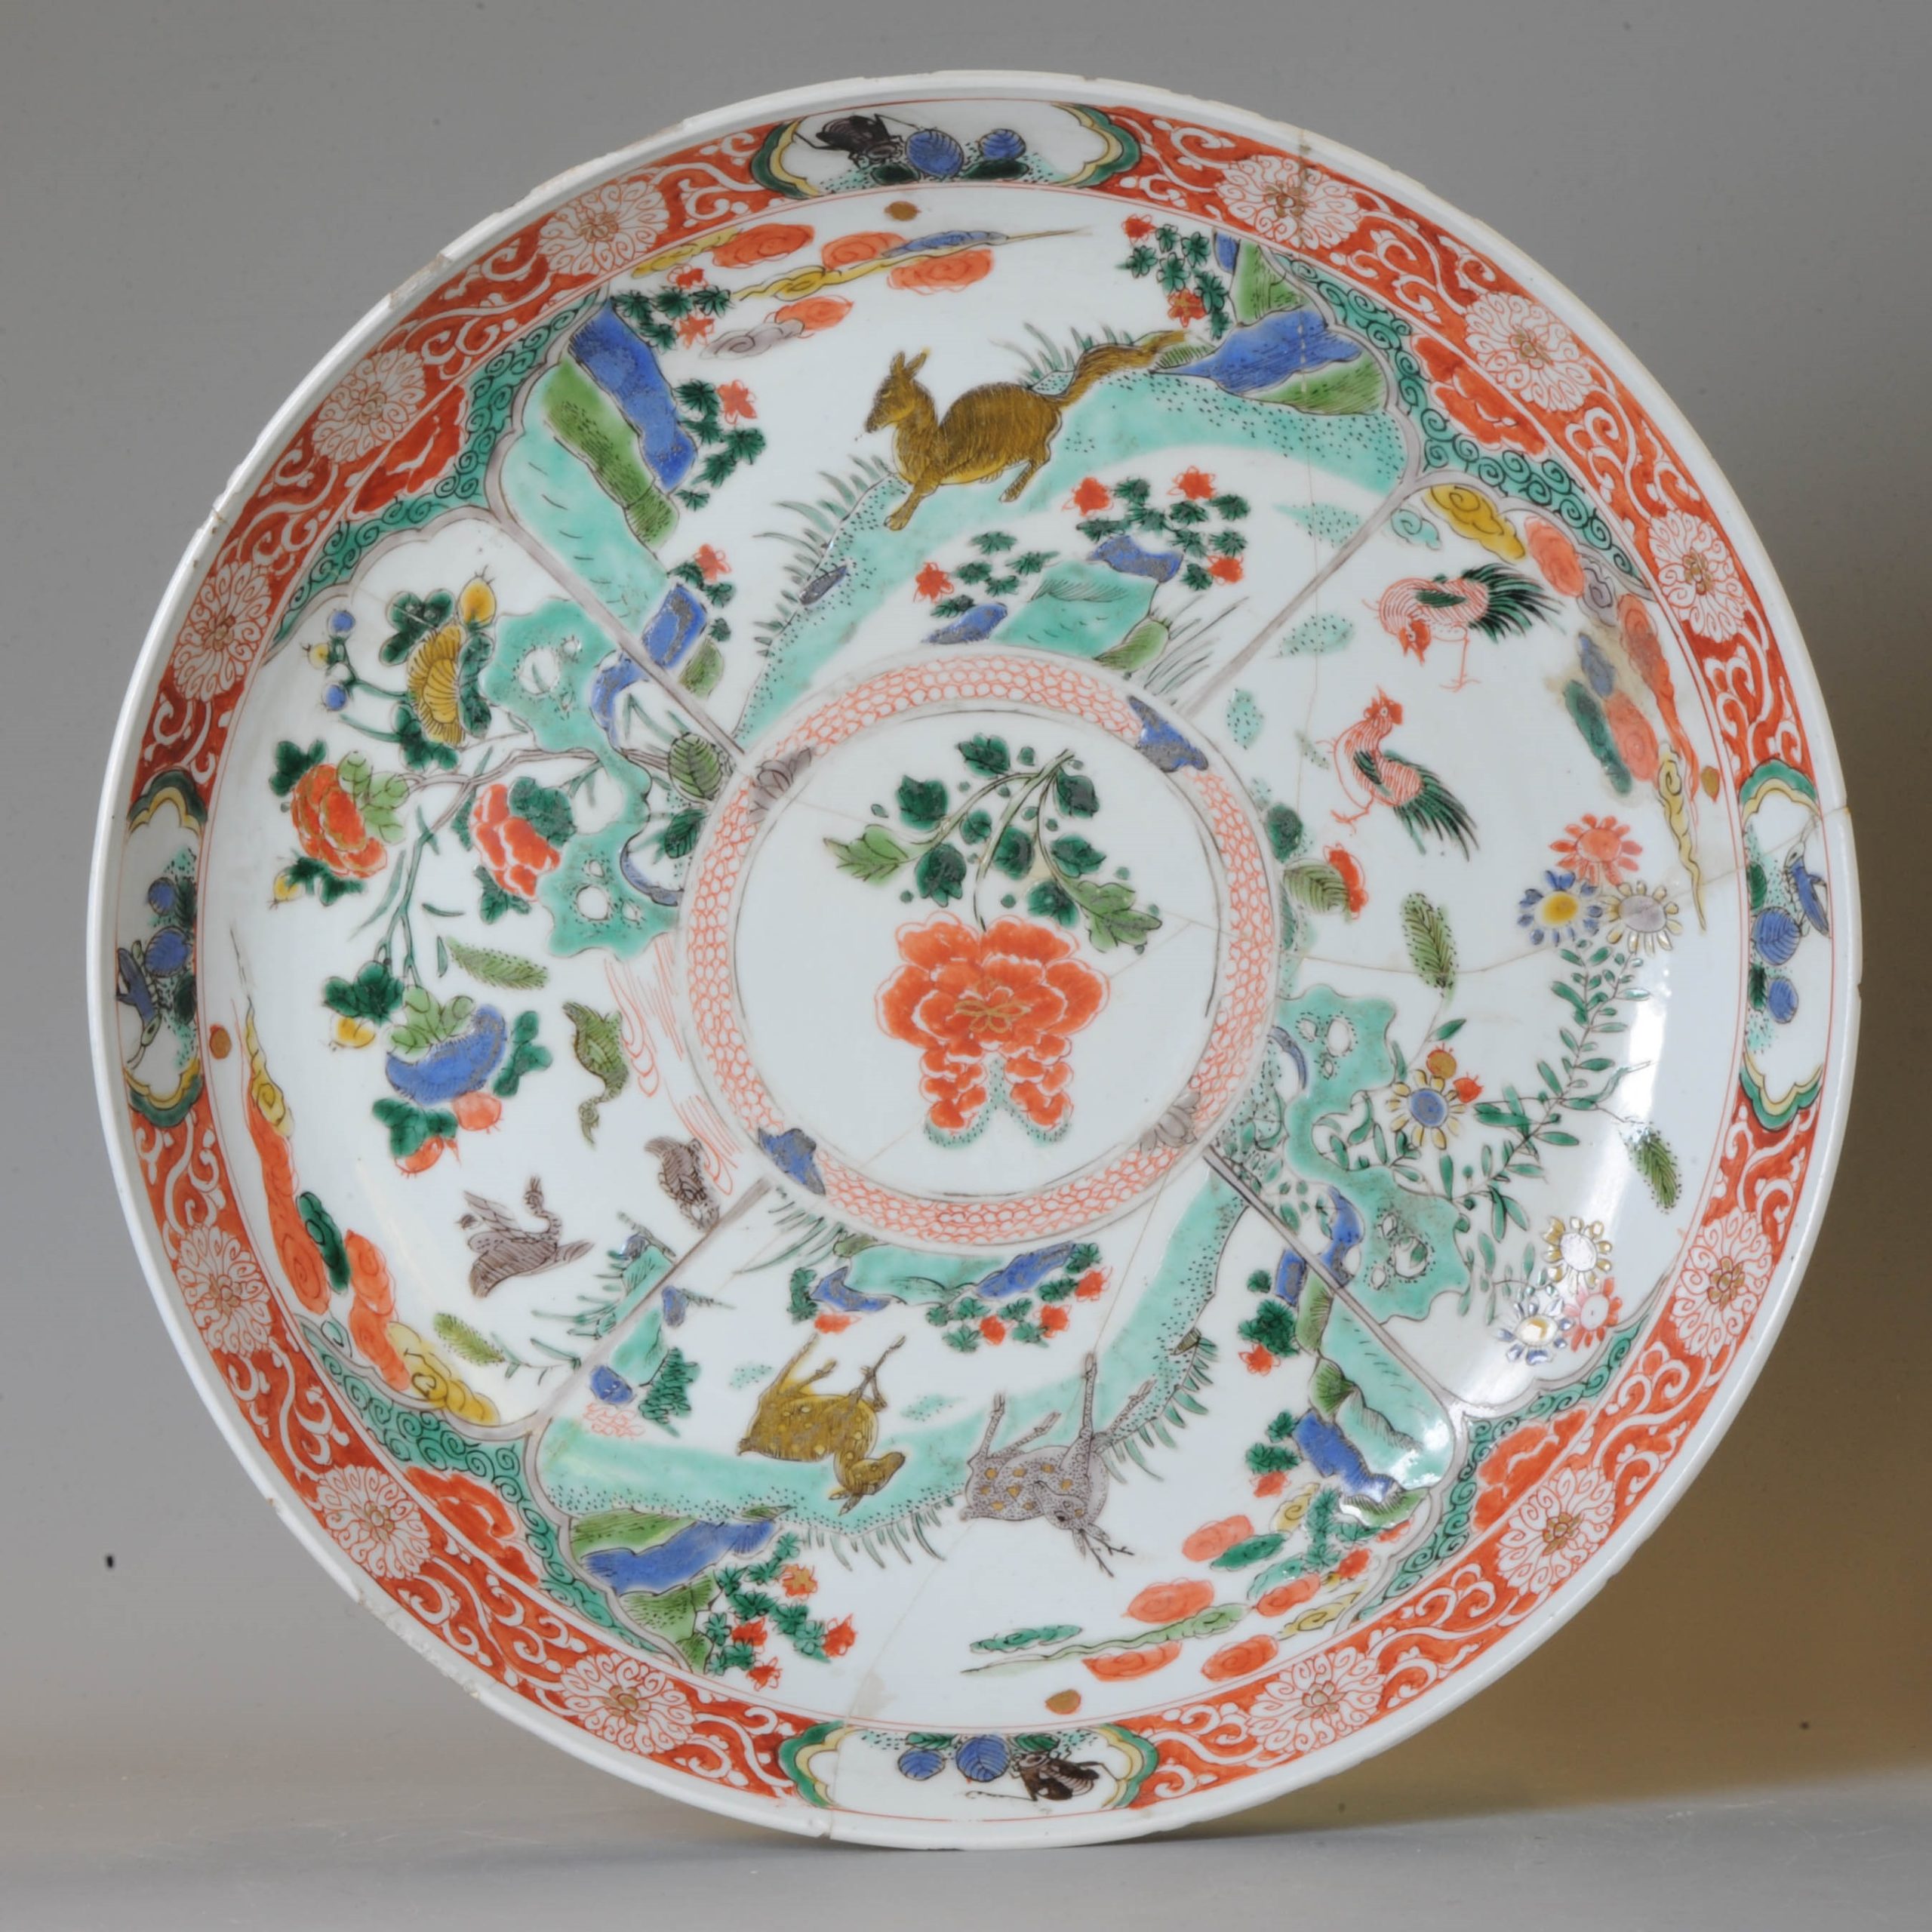 A Rare Top Quality 18th c Kangxi period Chinese Porcelain Famille Verte Plate China